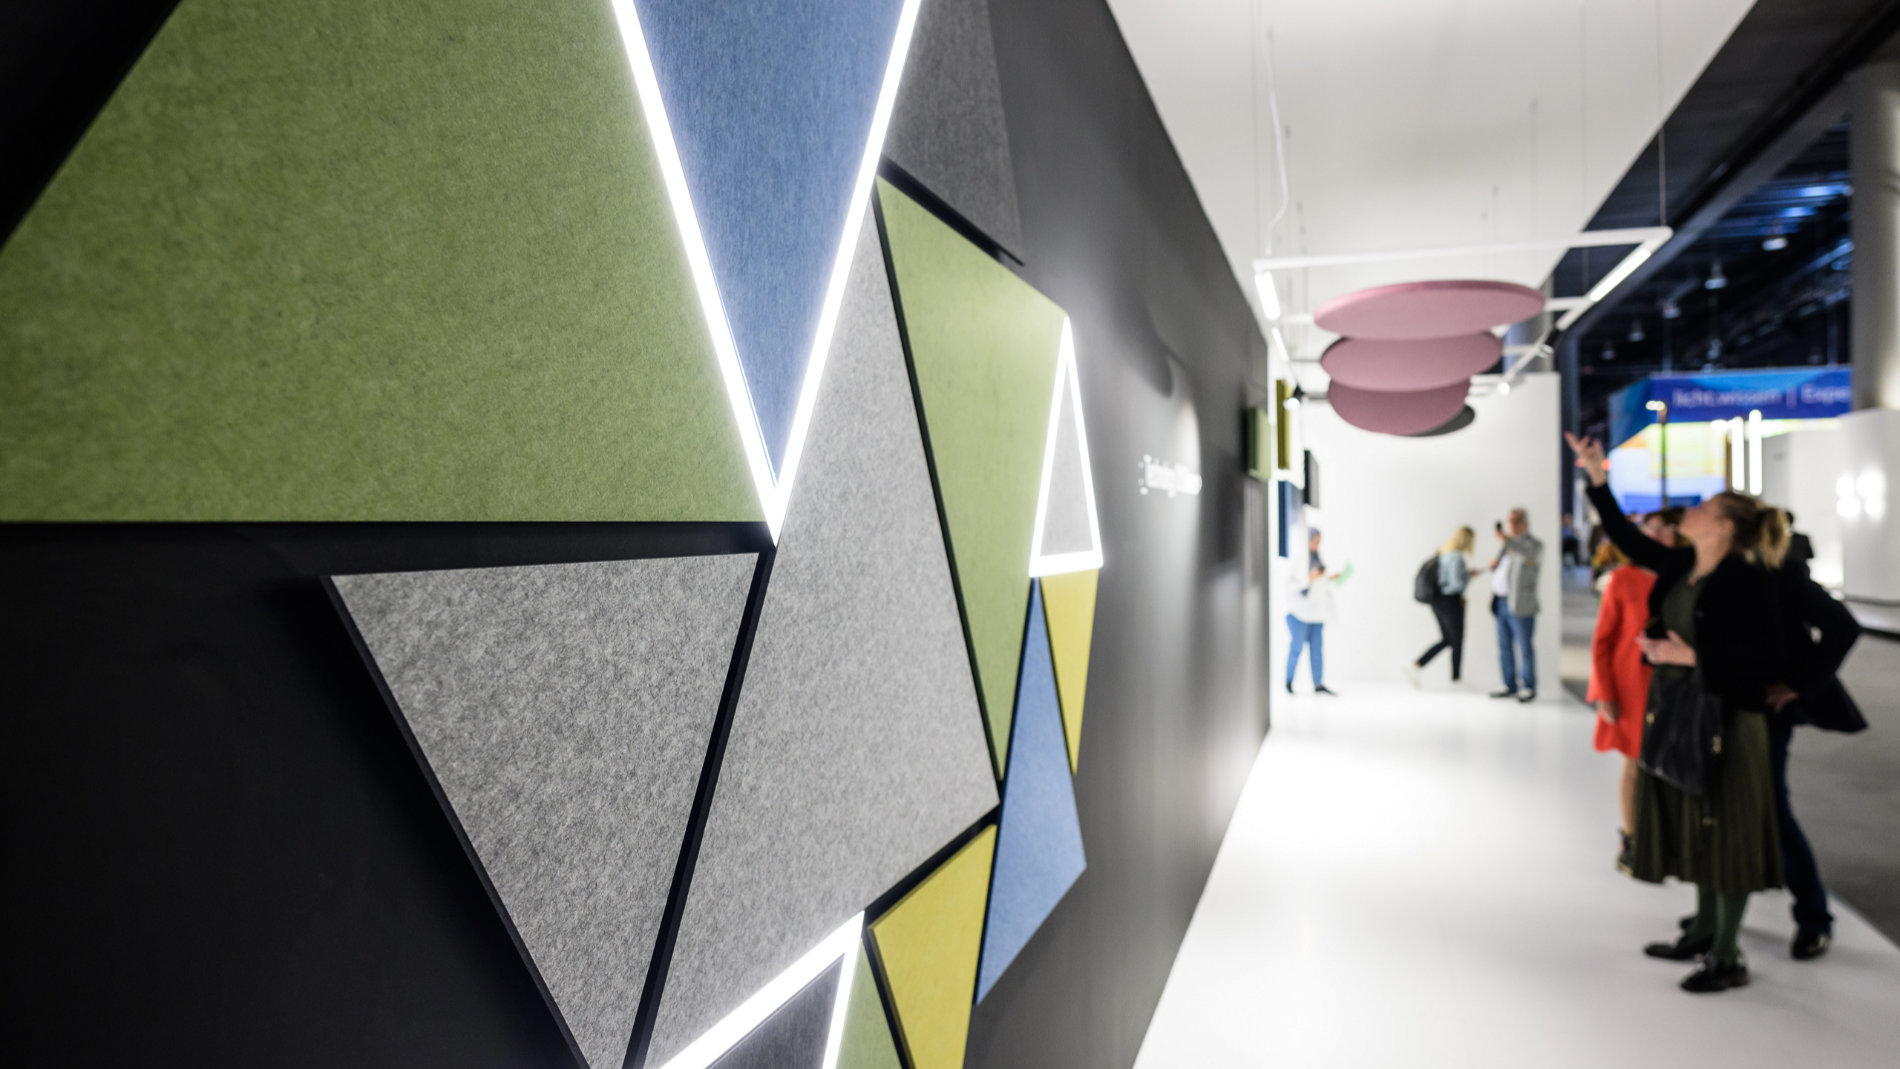 As a design element, noise-absorbing surfaces and lighting elements form a symbiosis.